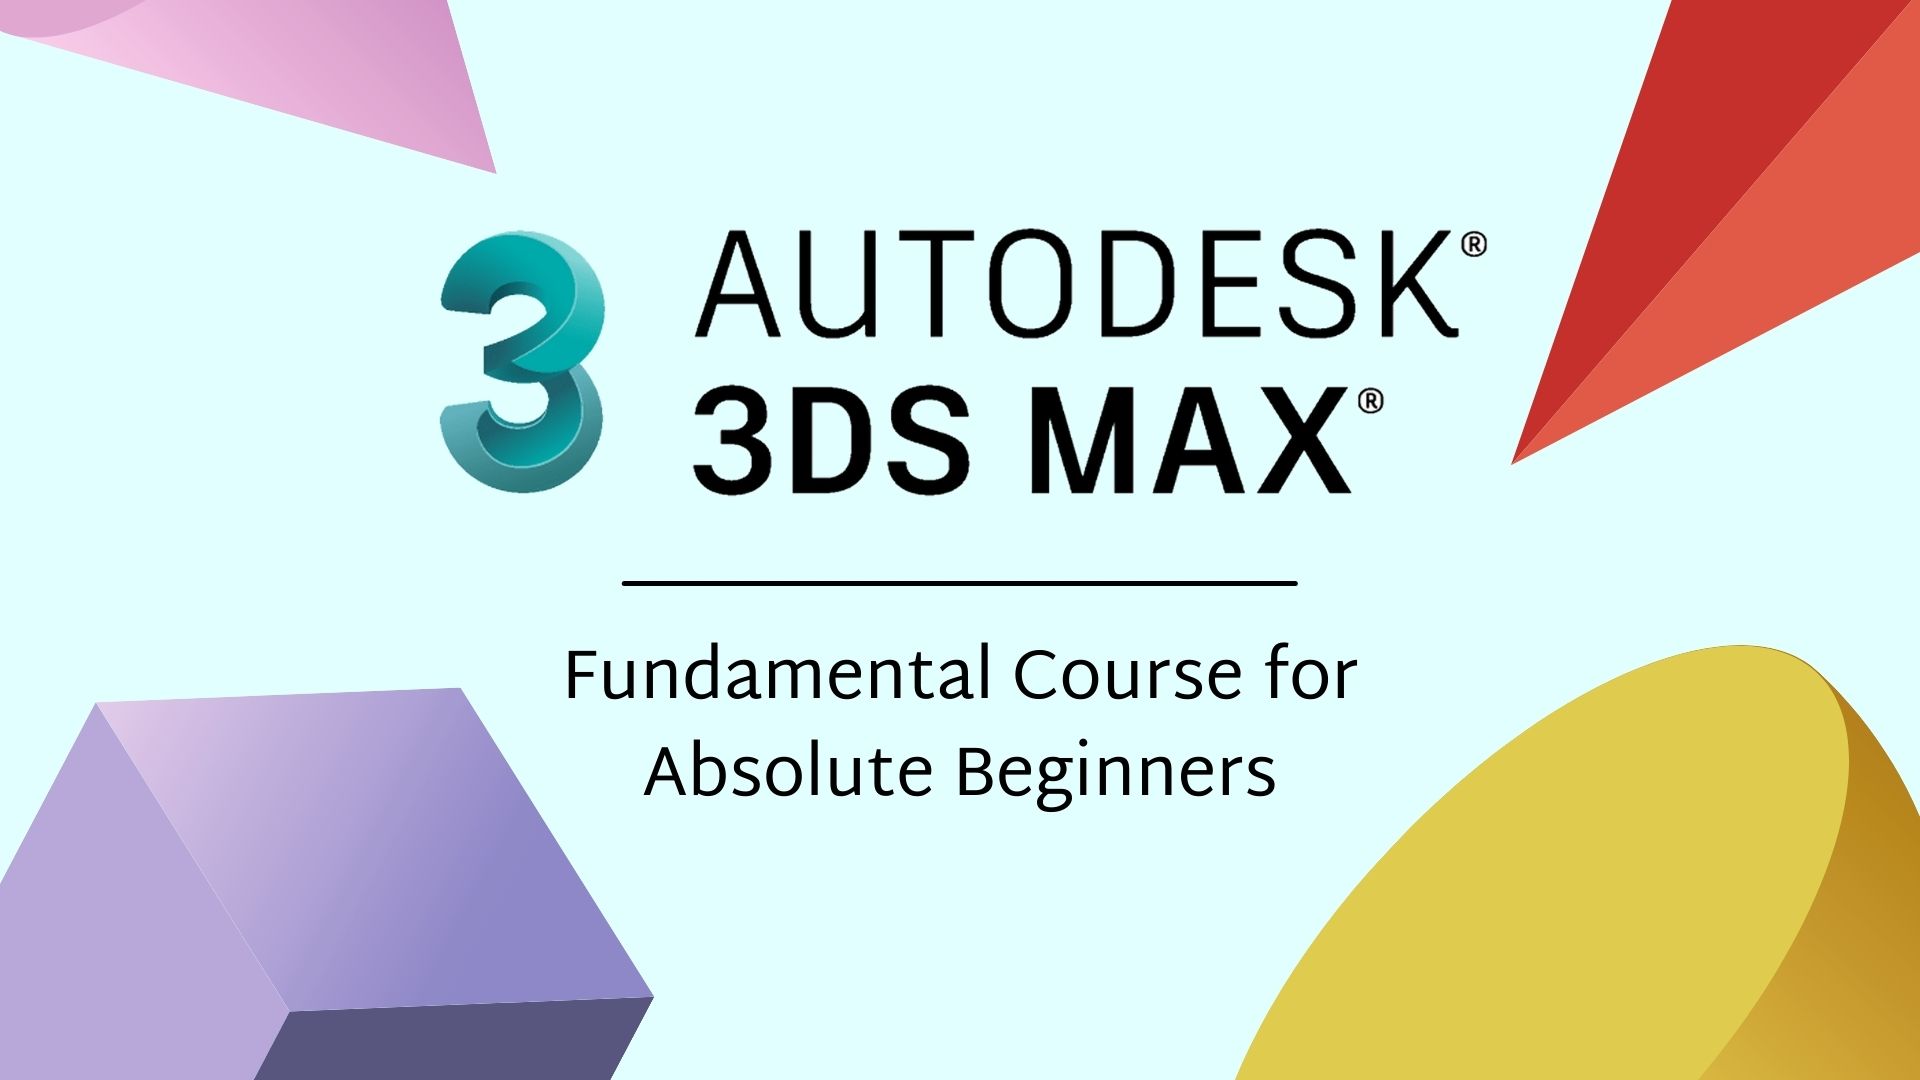 3DS MAX FUNDAMENTALS FOR ABSOLUTE BEGINNERS COURSE IMAGE